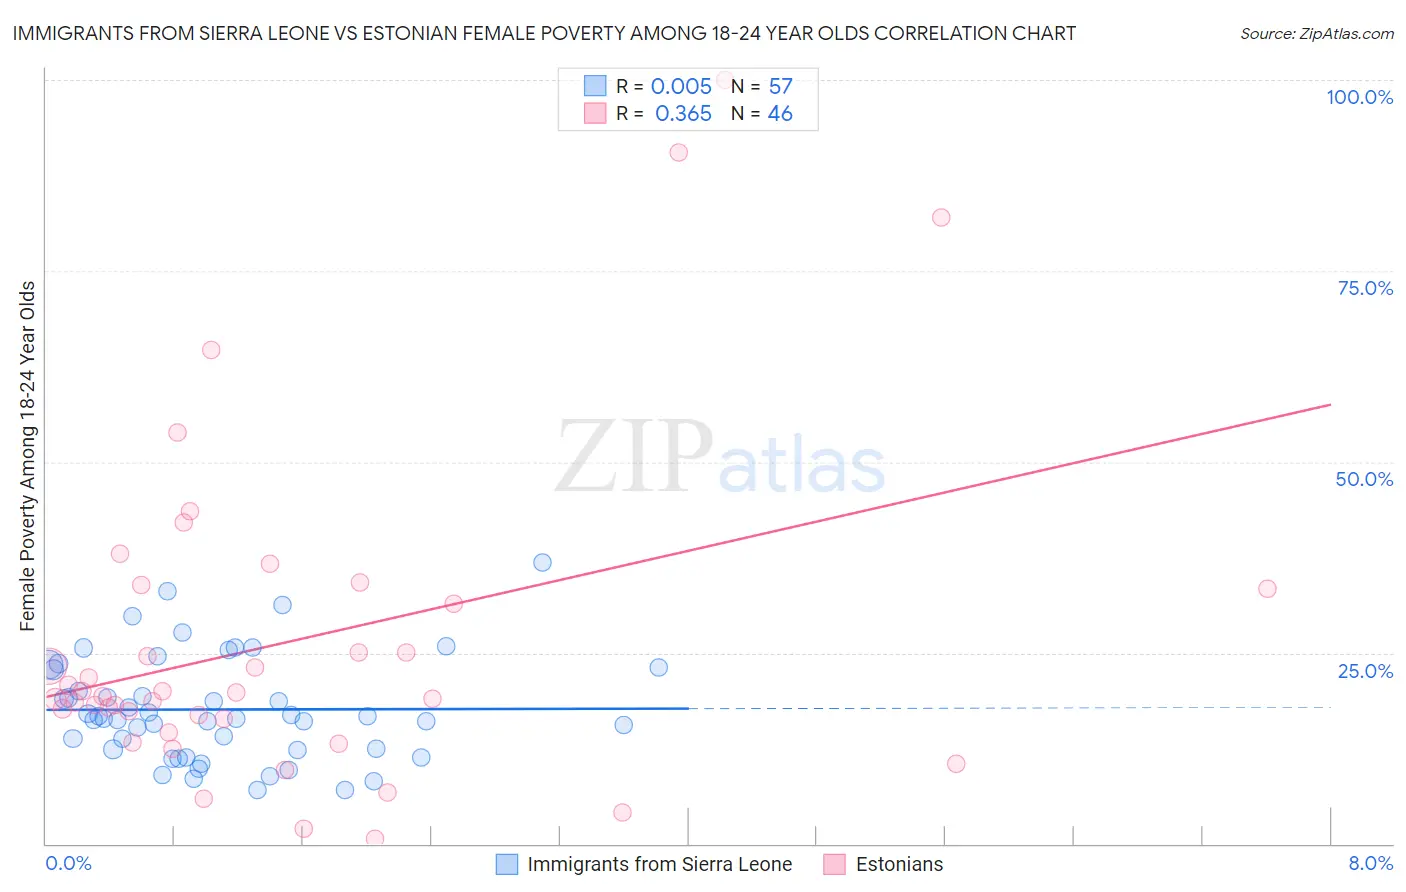 Immigrants from Sierra Leone vs Estonian Female Poverty Among 18-24 Year Olds